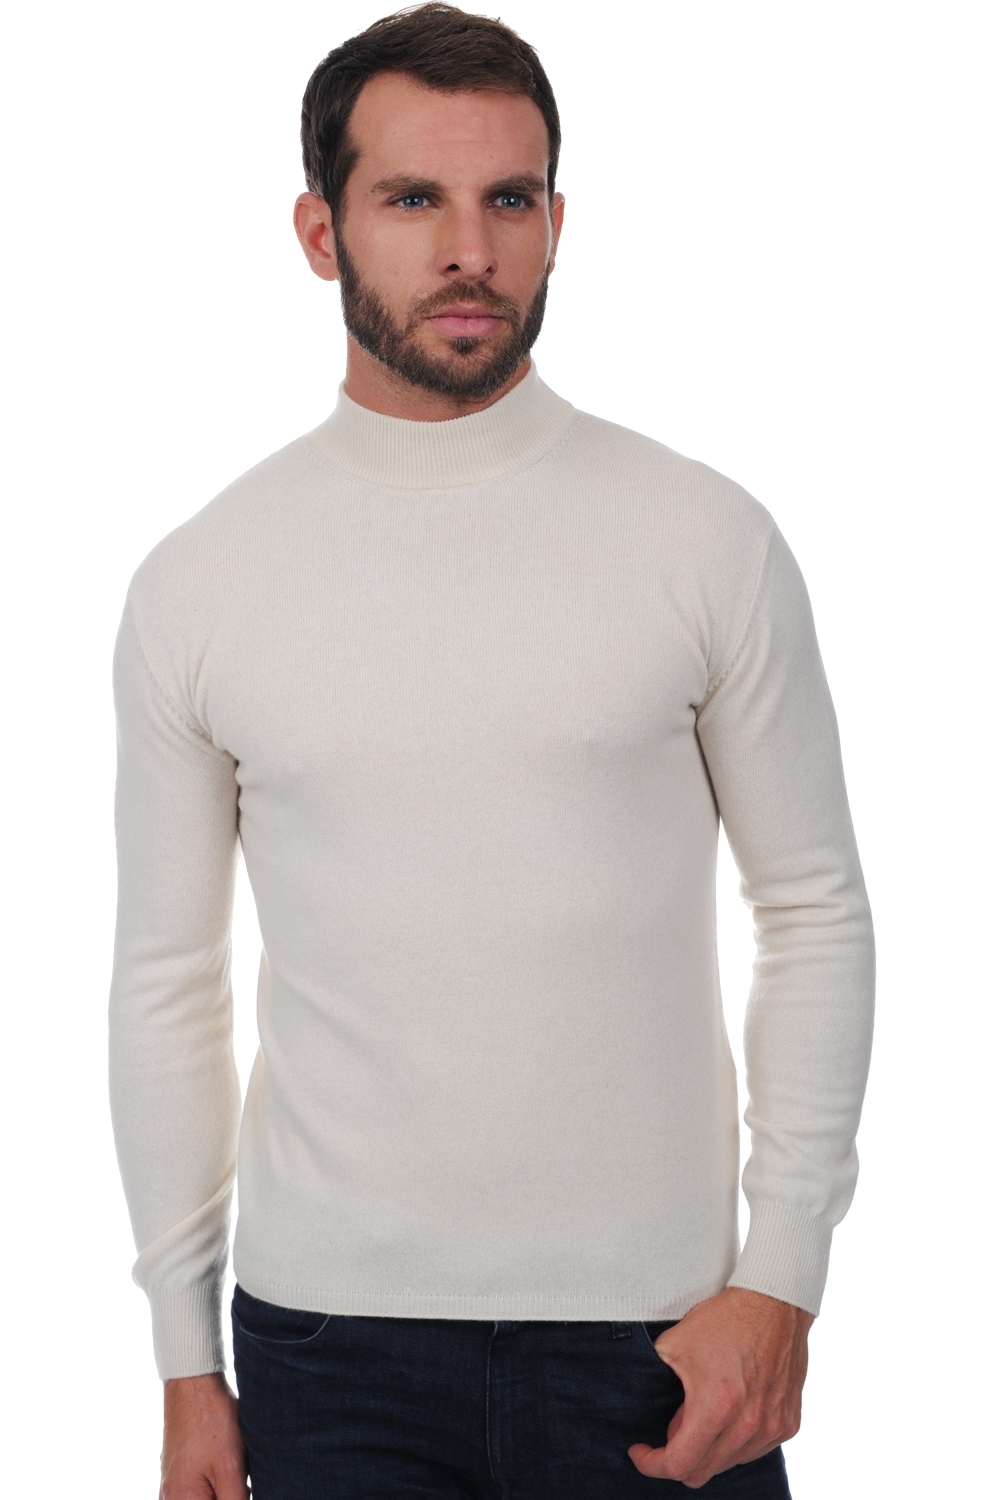 Cachemire pull homme col roule frederic natural ecru 3xl